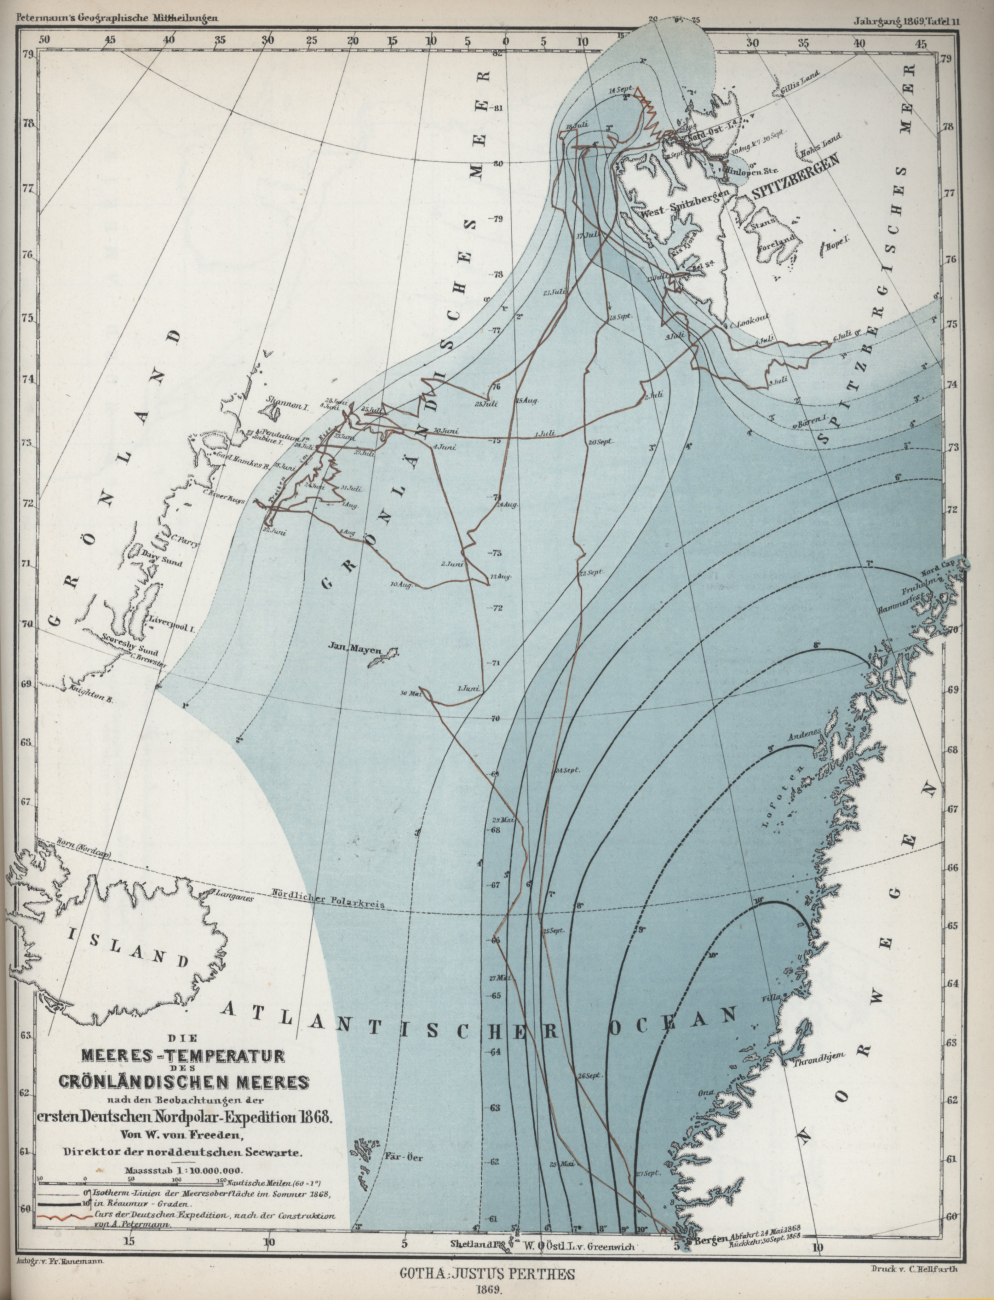 Sea surface temperatures observed in the Greenland Sea during the GermanNorth Polar Expedition of 1869